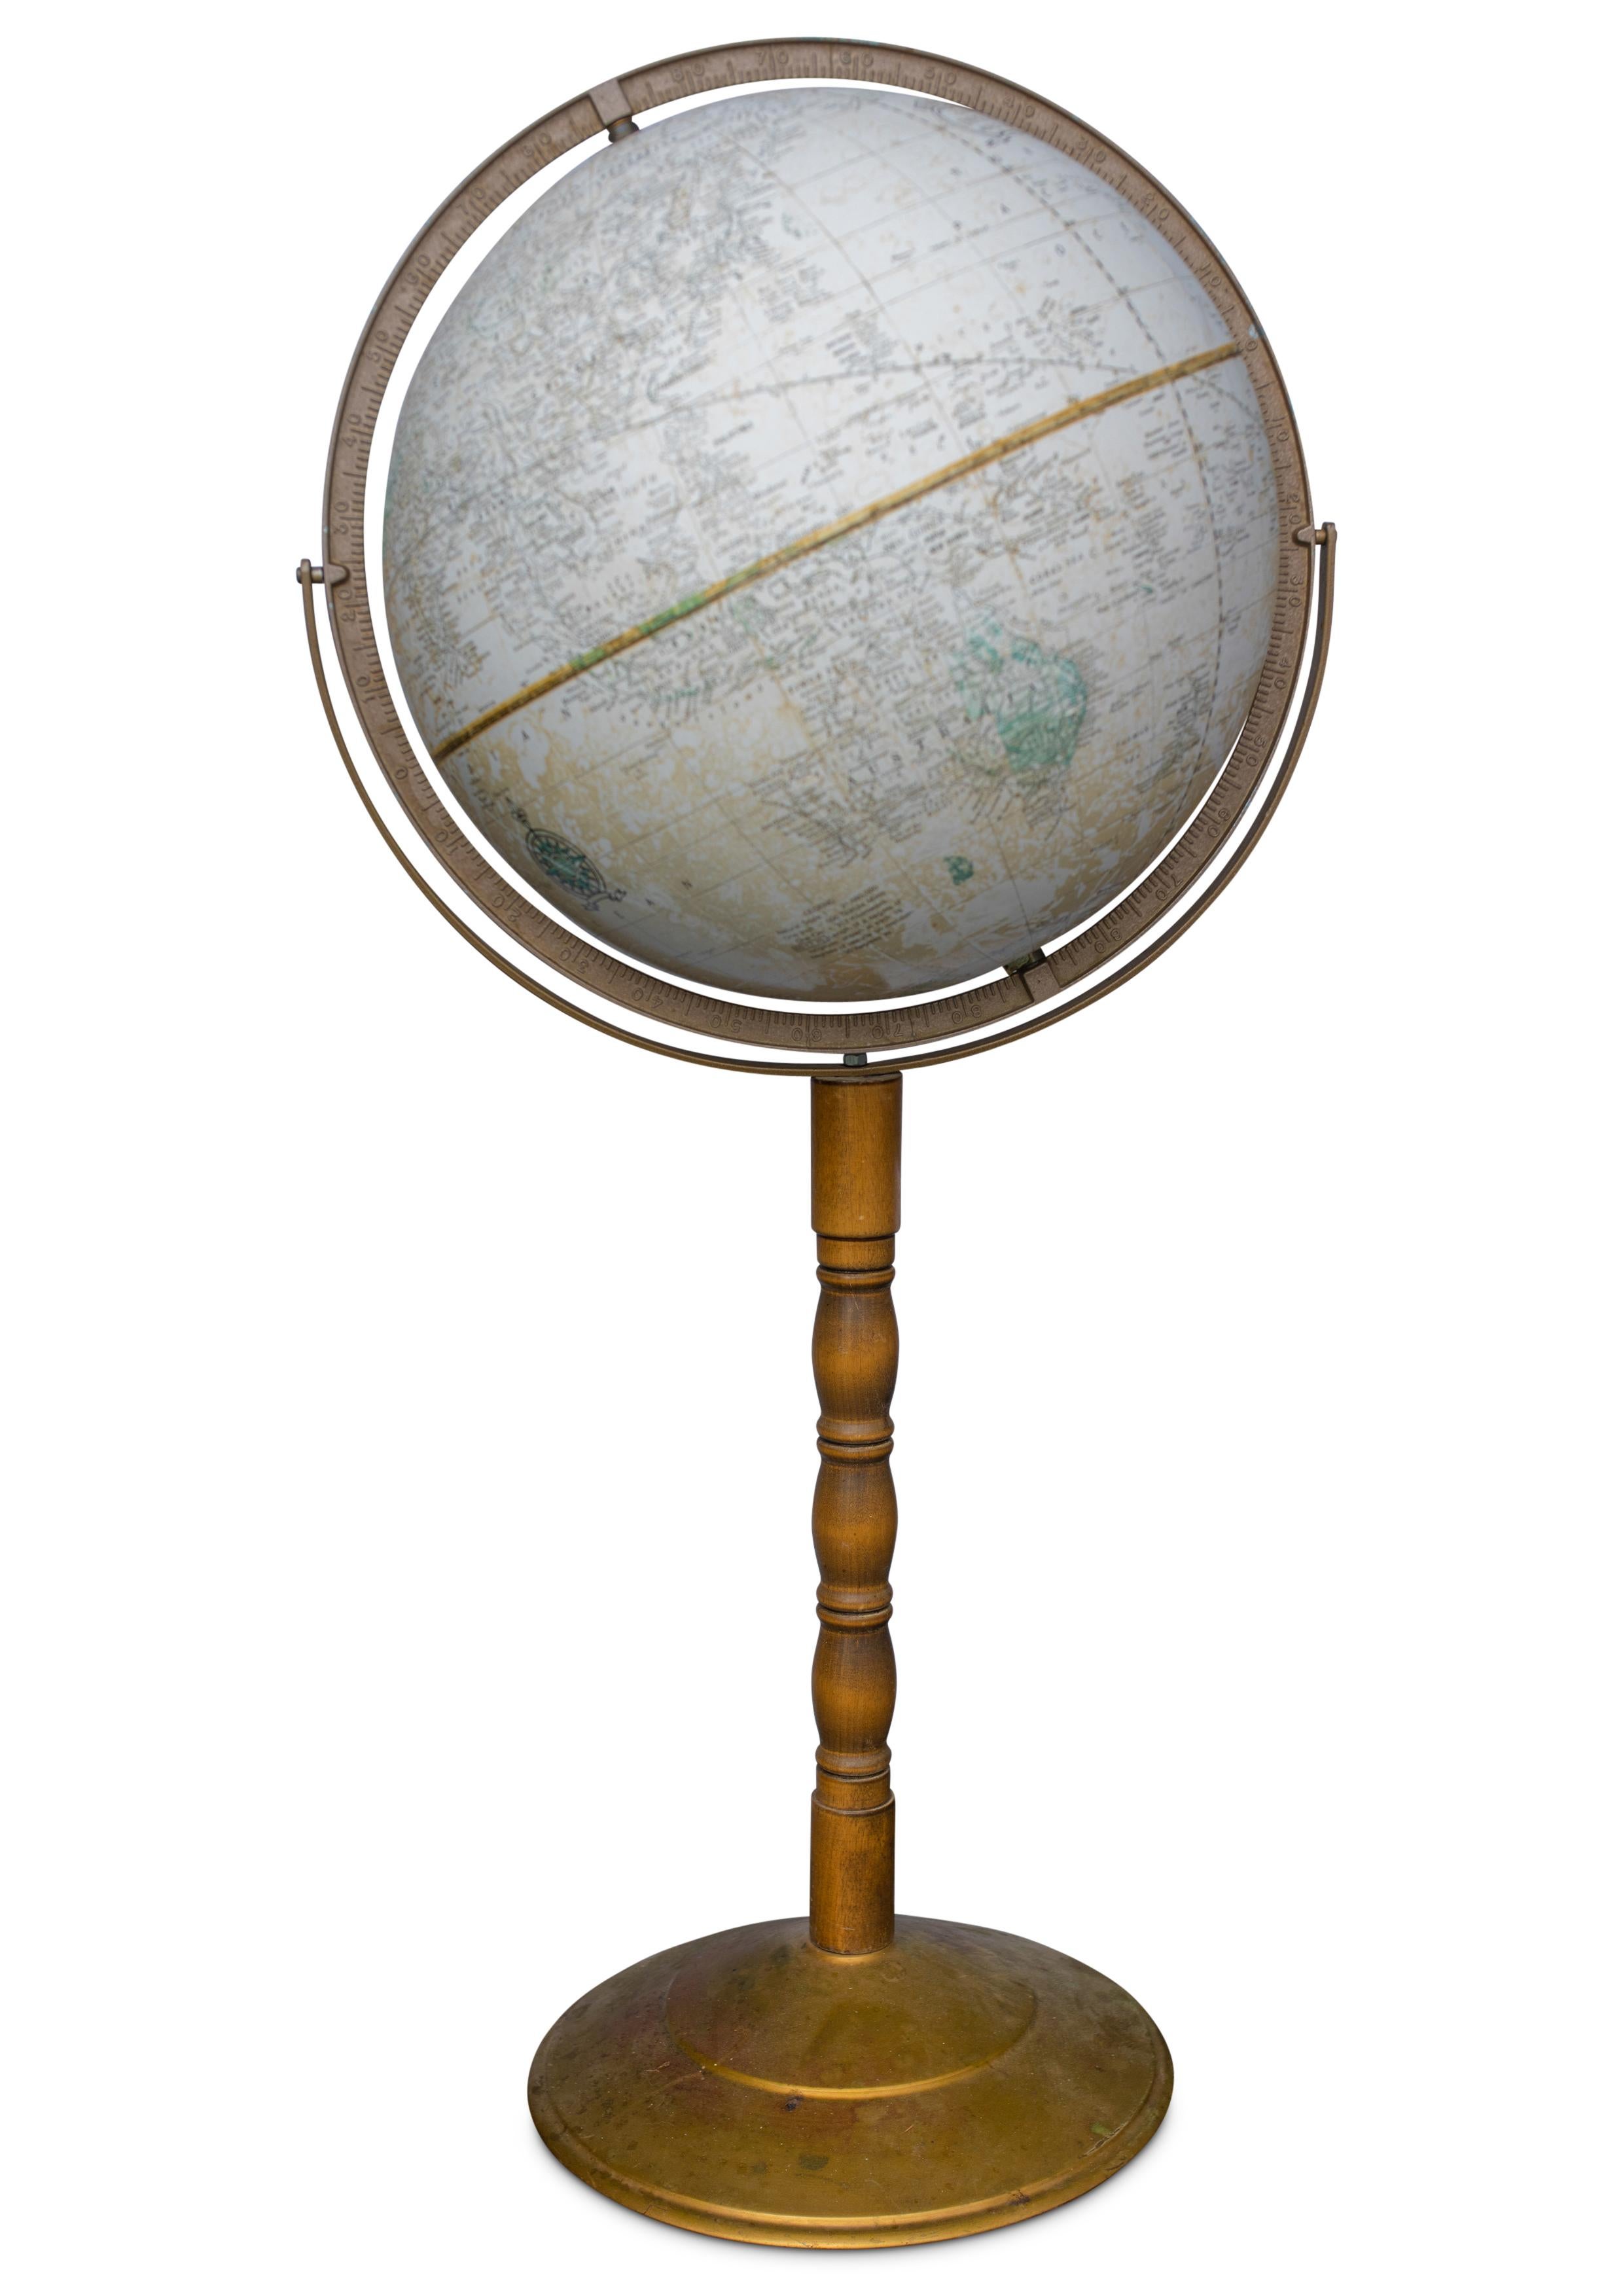 Crams Imperial World Globe 

Floor Standing Globe On A Turned Hardwood & Brass Stand Model No 16 

Manufactured by George F Cram Co. Indiana, U.S.A

Sizes are guesstimates